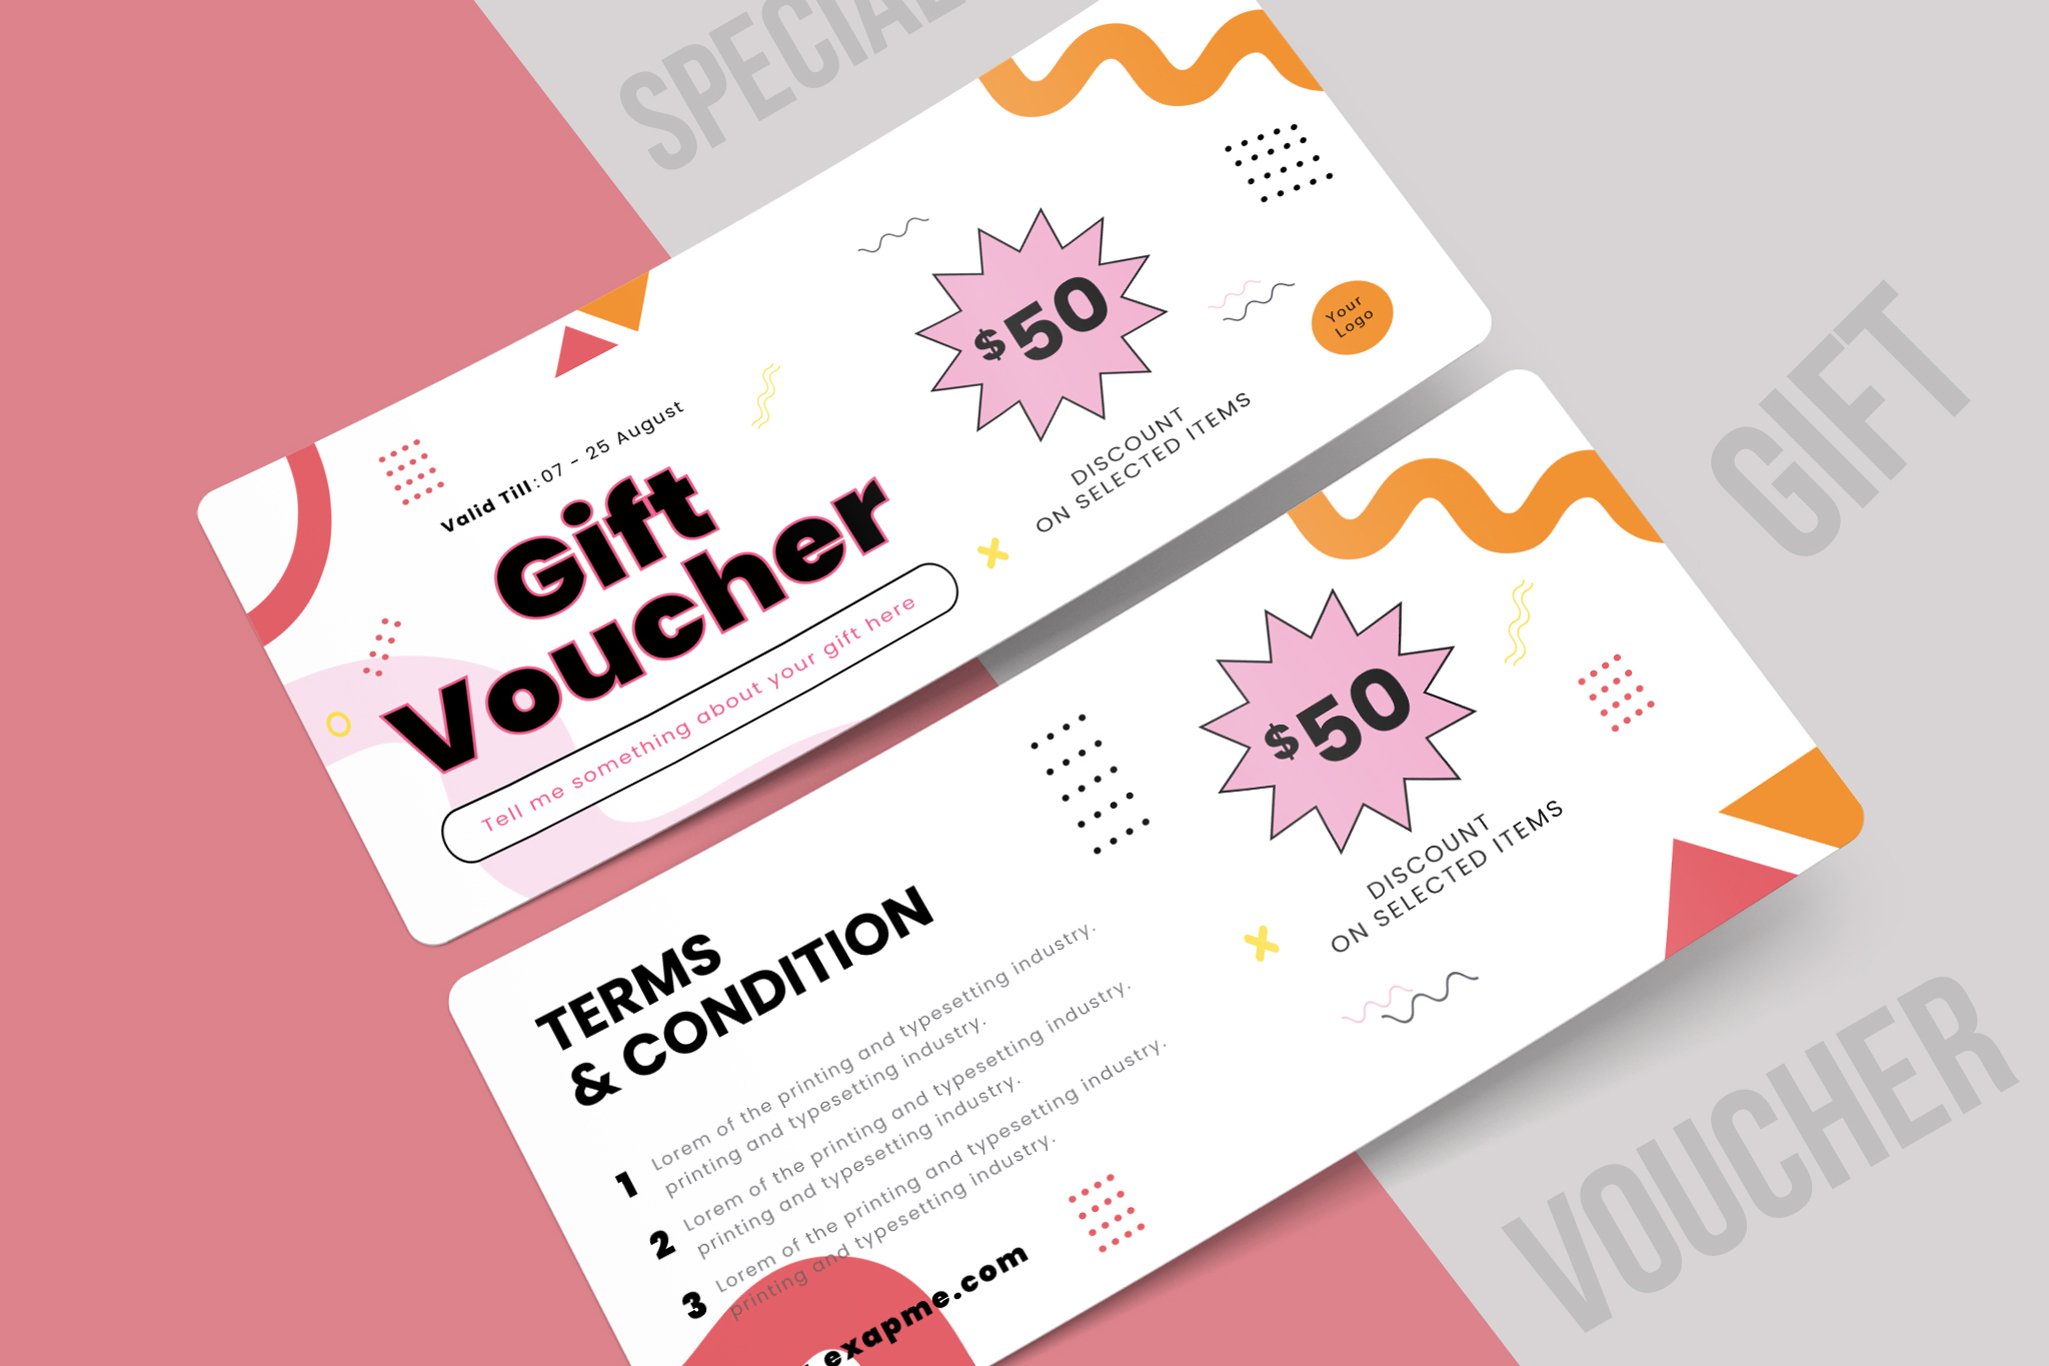 How to Make a VOUCHER in WORD | Create a Gift Voucher - YouTube